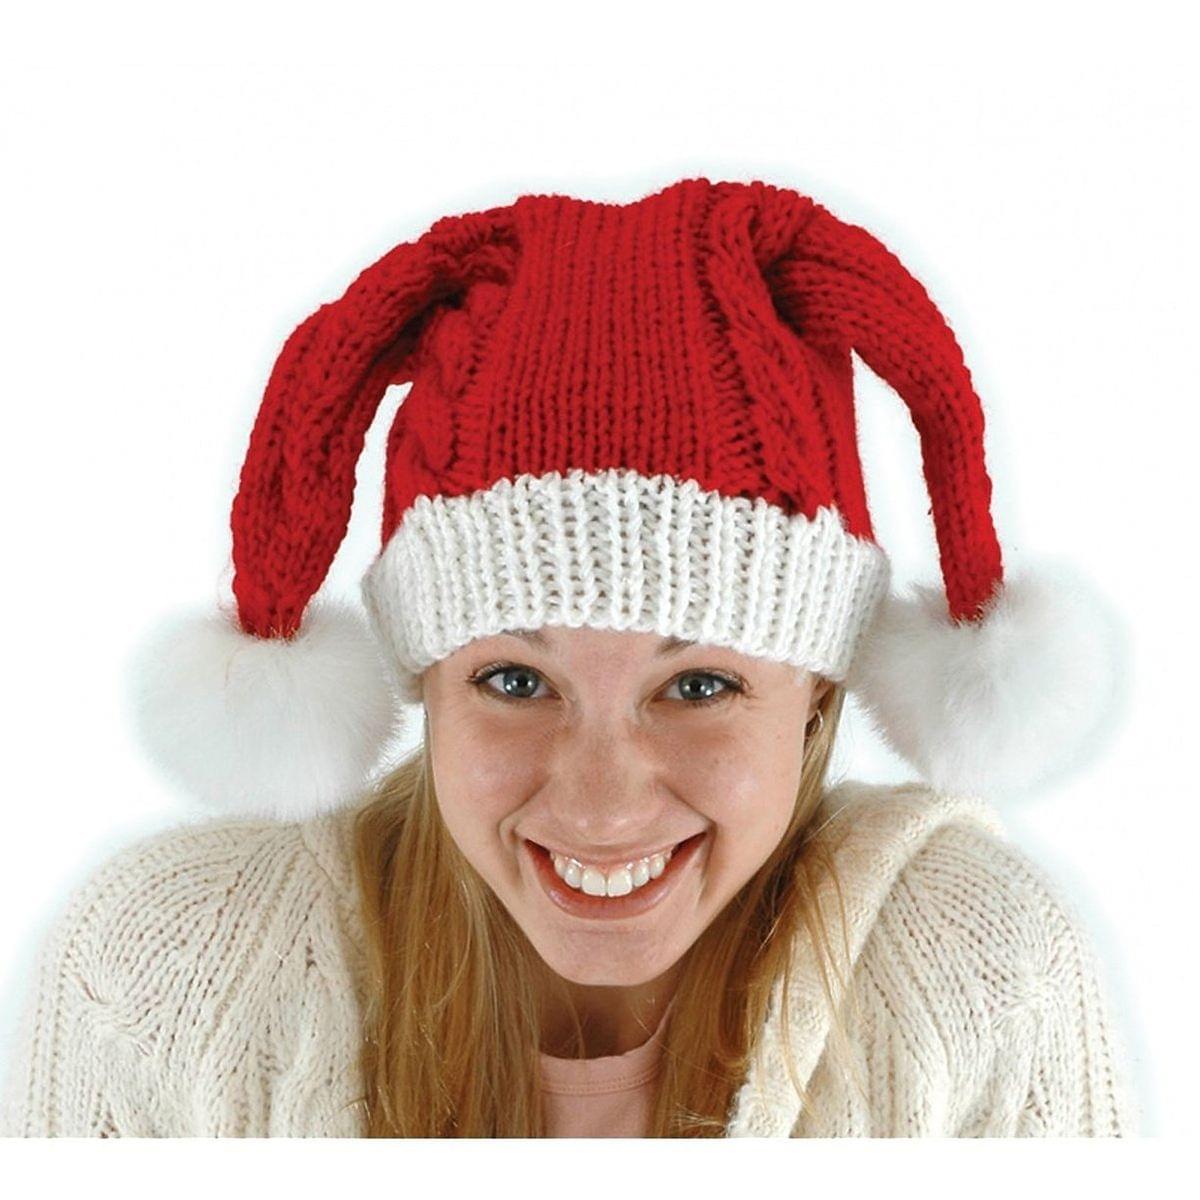 Knit Santa Claus Adult Red Hat Costume Accessory One Size